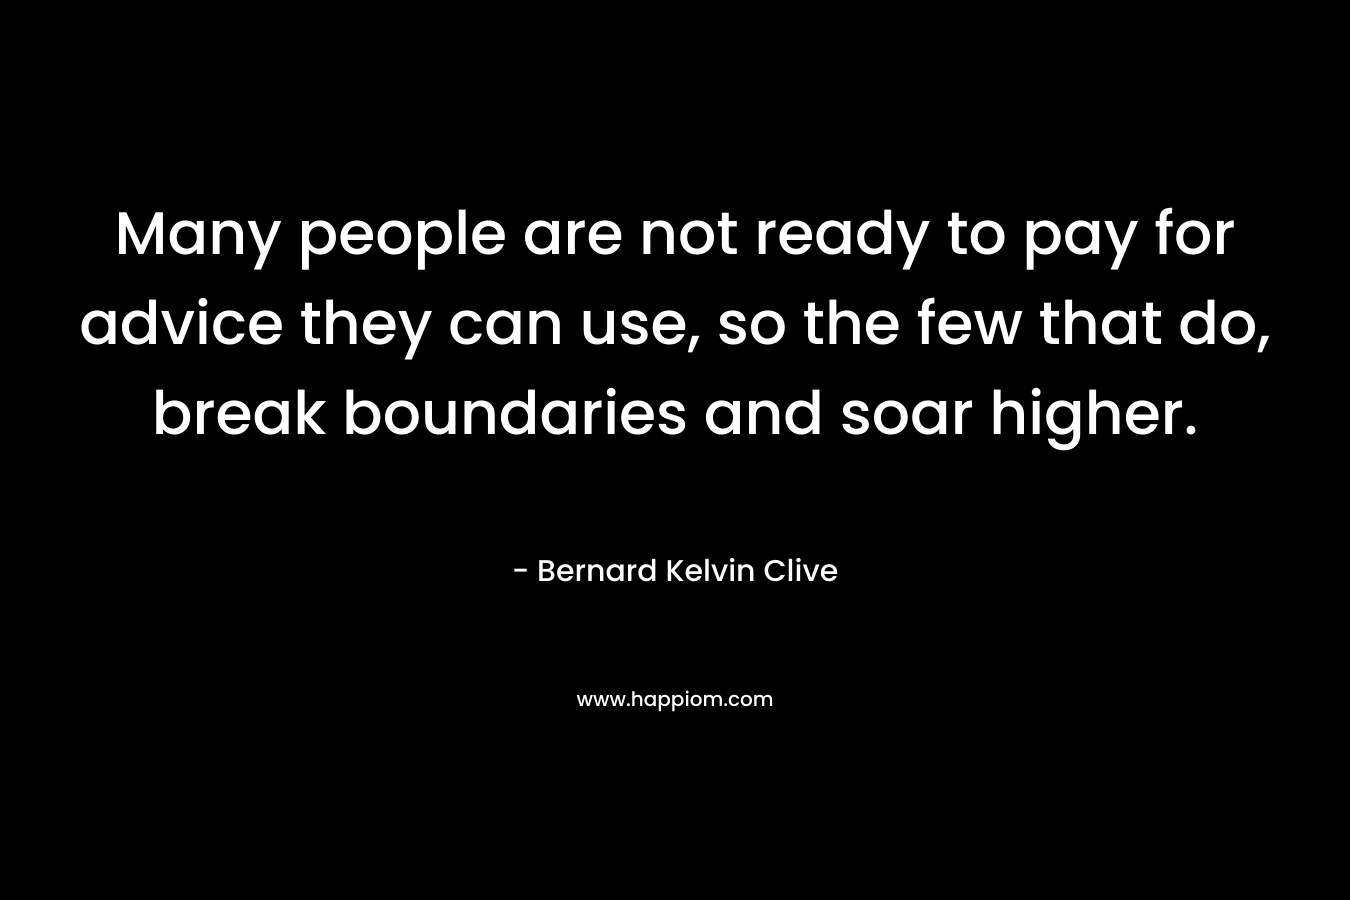 Many people are not ready to pay for advice they can use, so the few that do, break boundaries and soar higher.